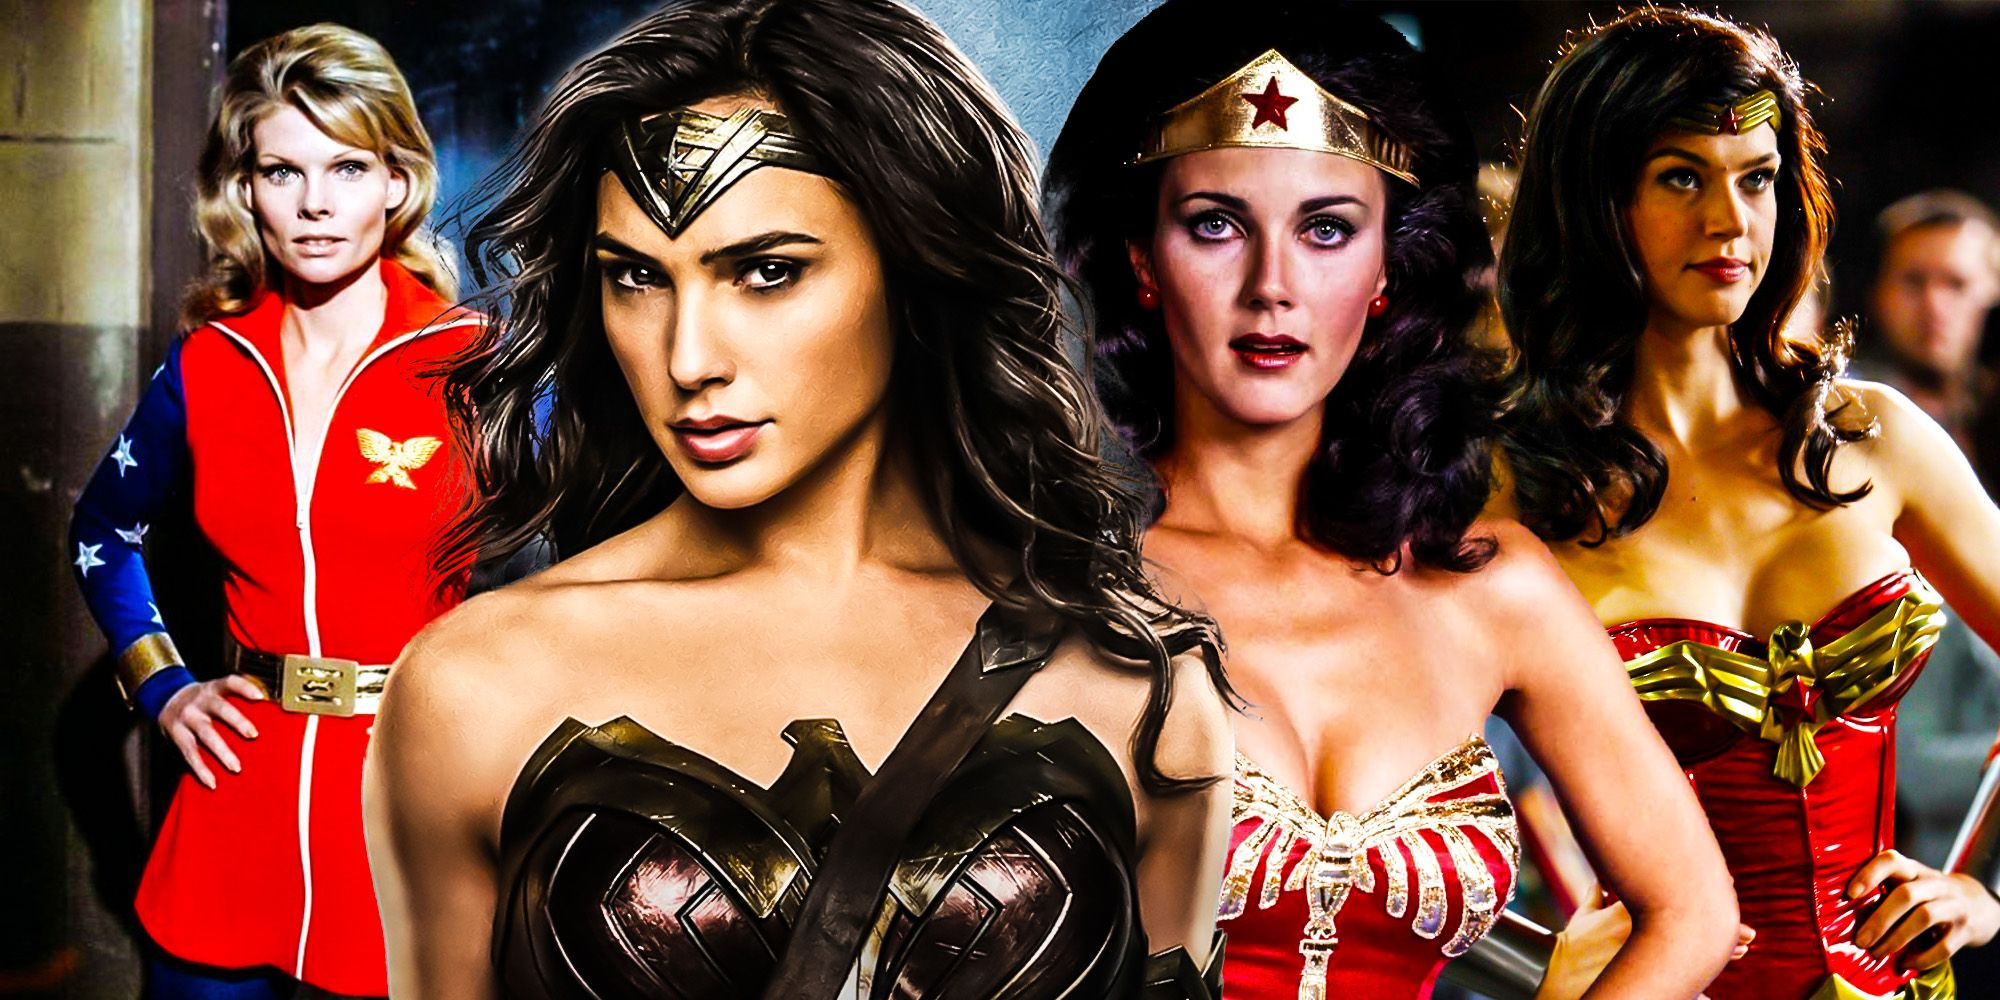 Every actor who played live action wonder woman Gal Gadot lynda carter Cathy Lee Crosby Adrienne Palicki